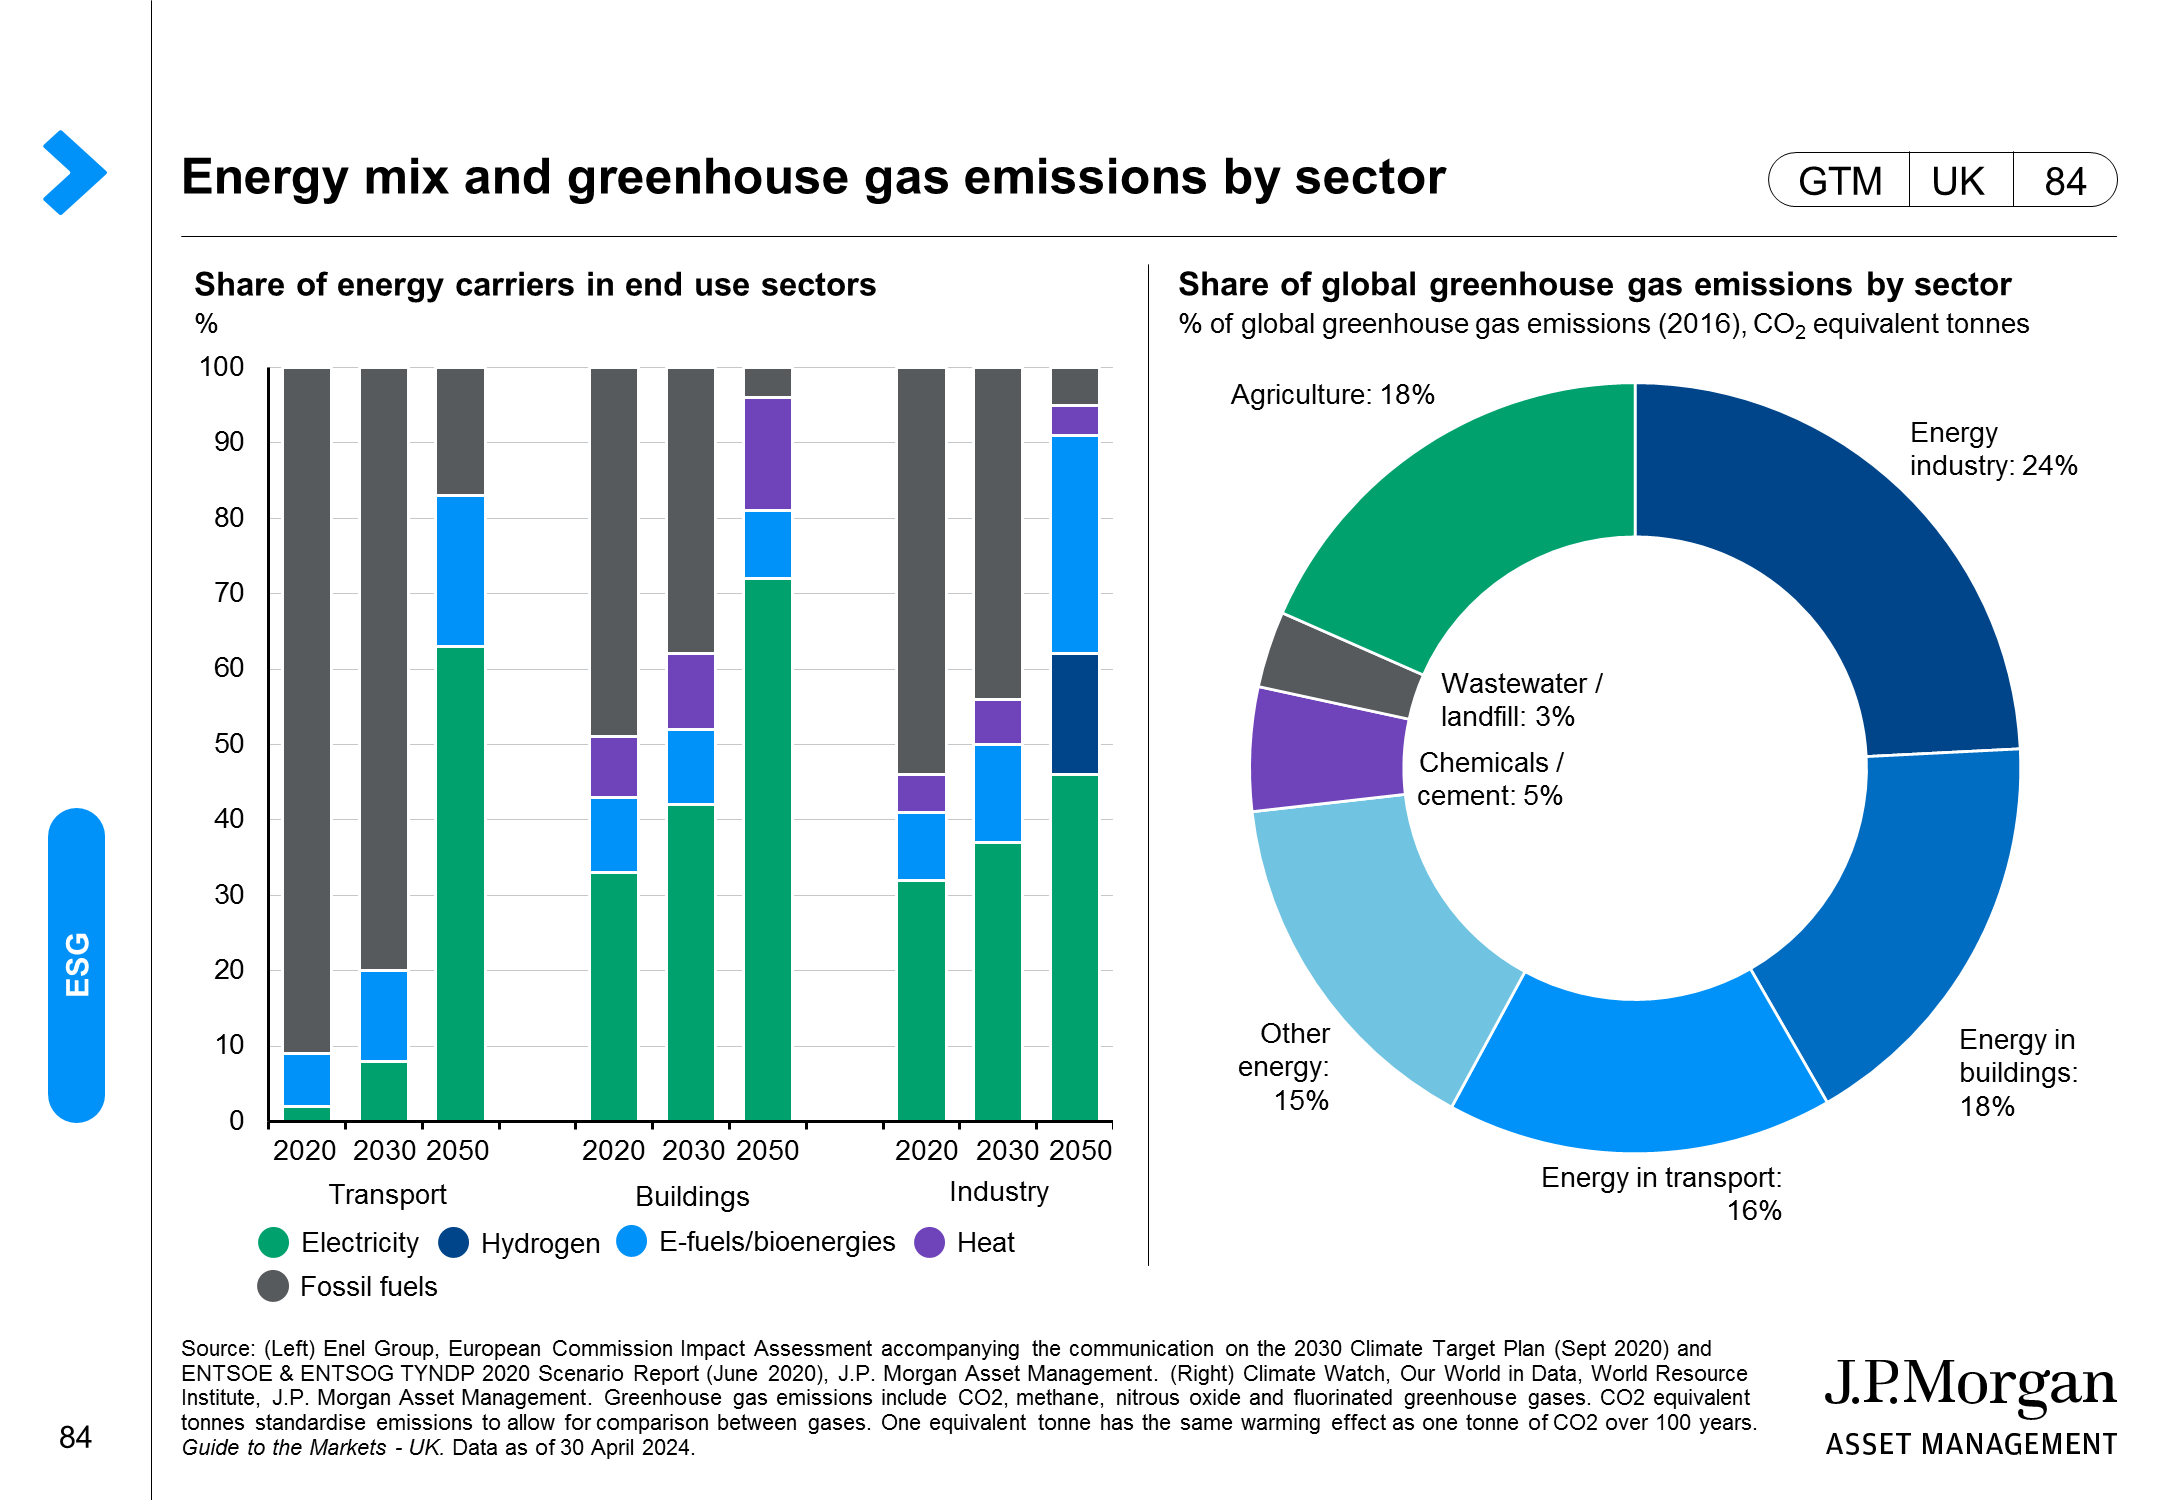 Global energy mix and greenhouse gas emissions by sector